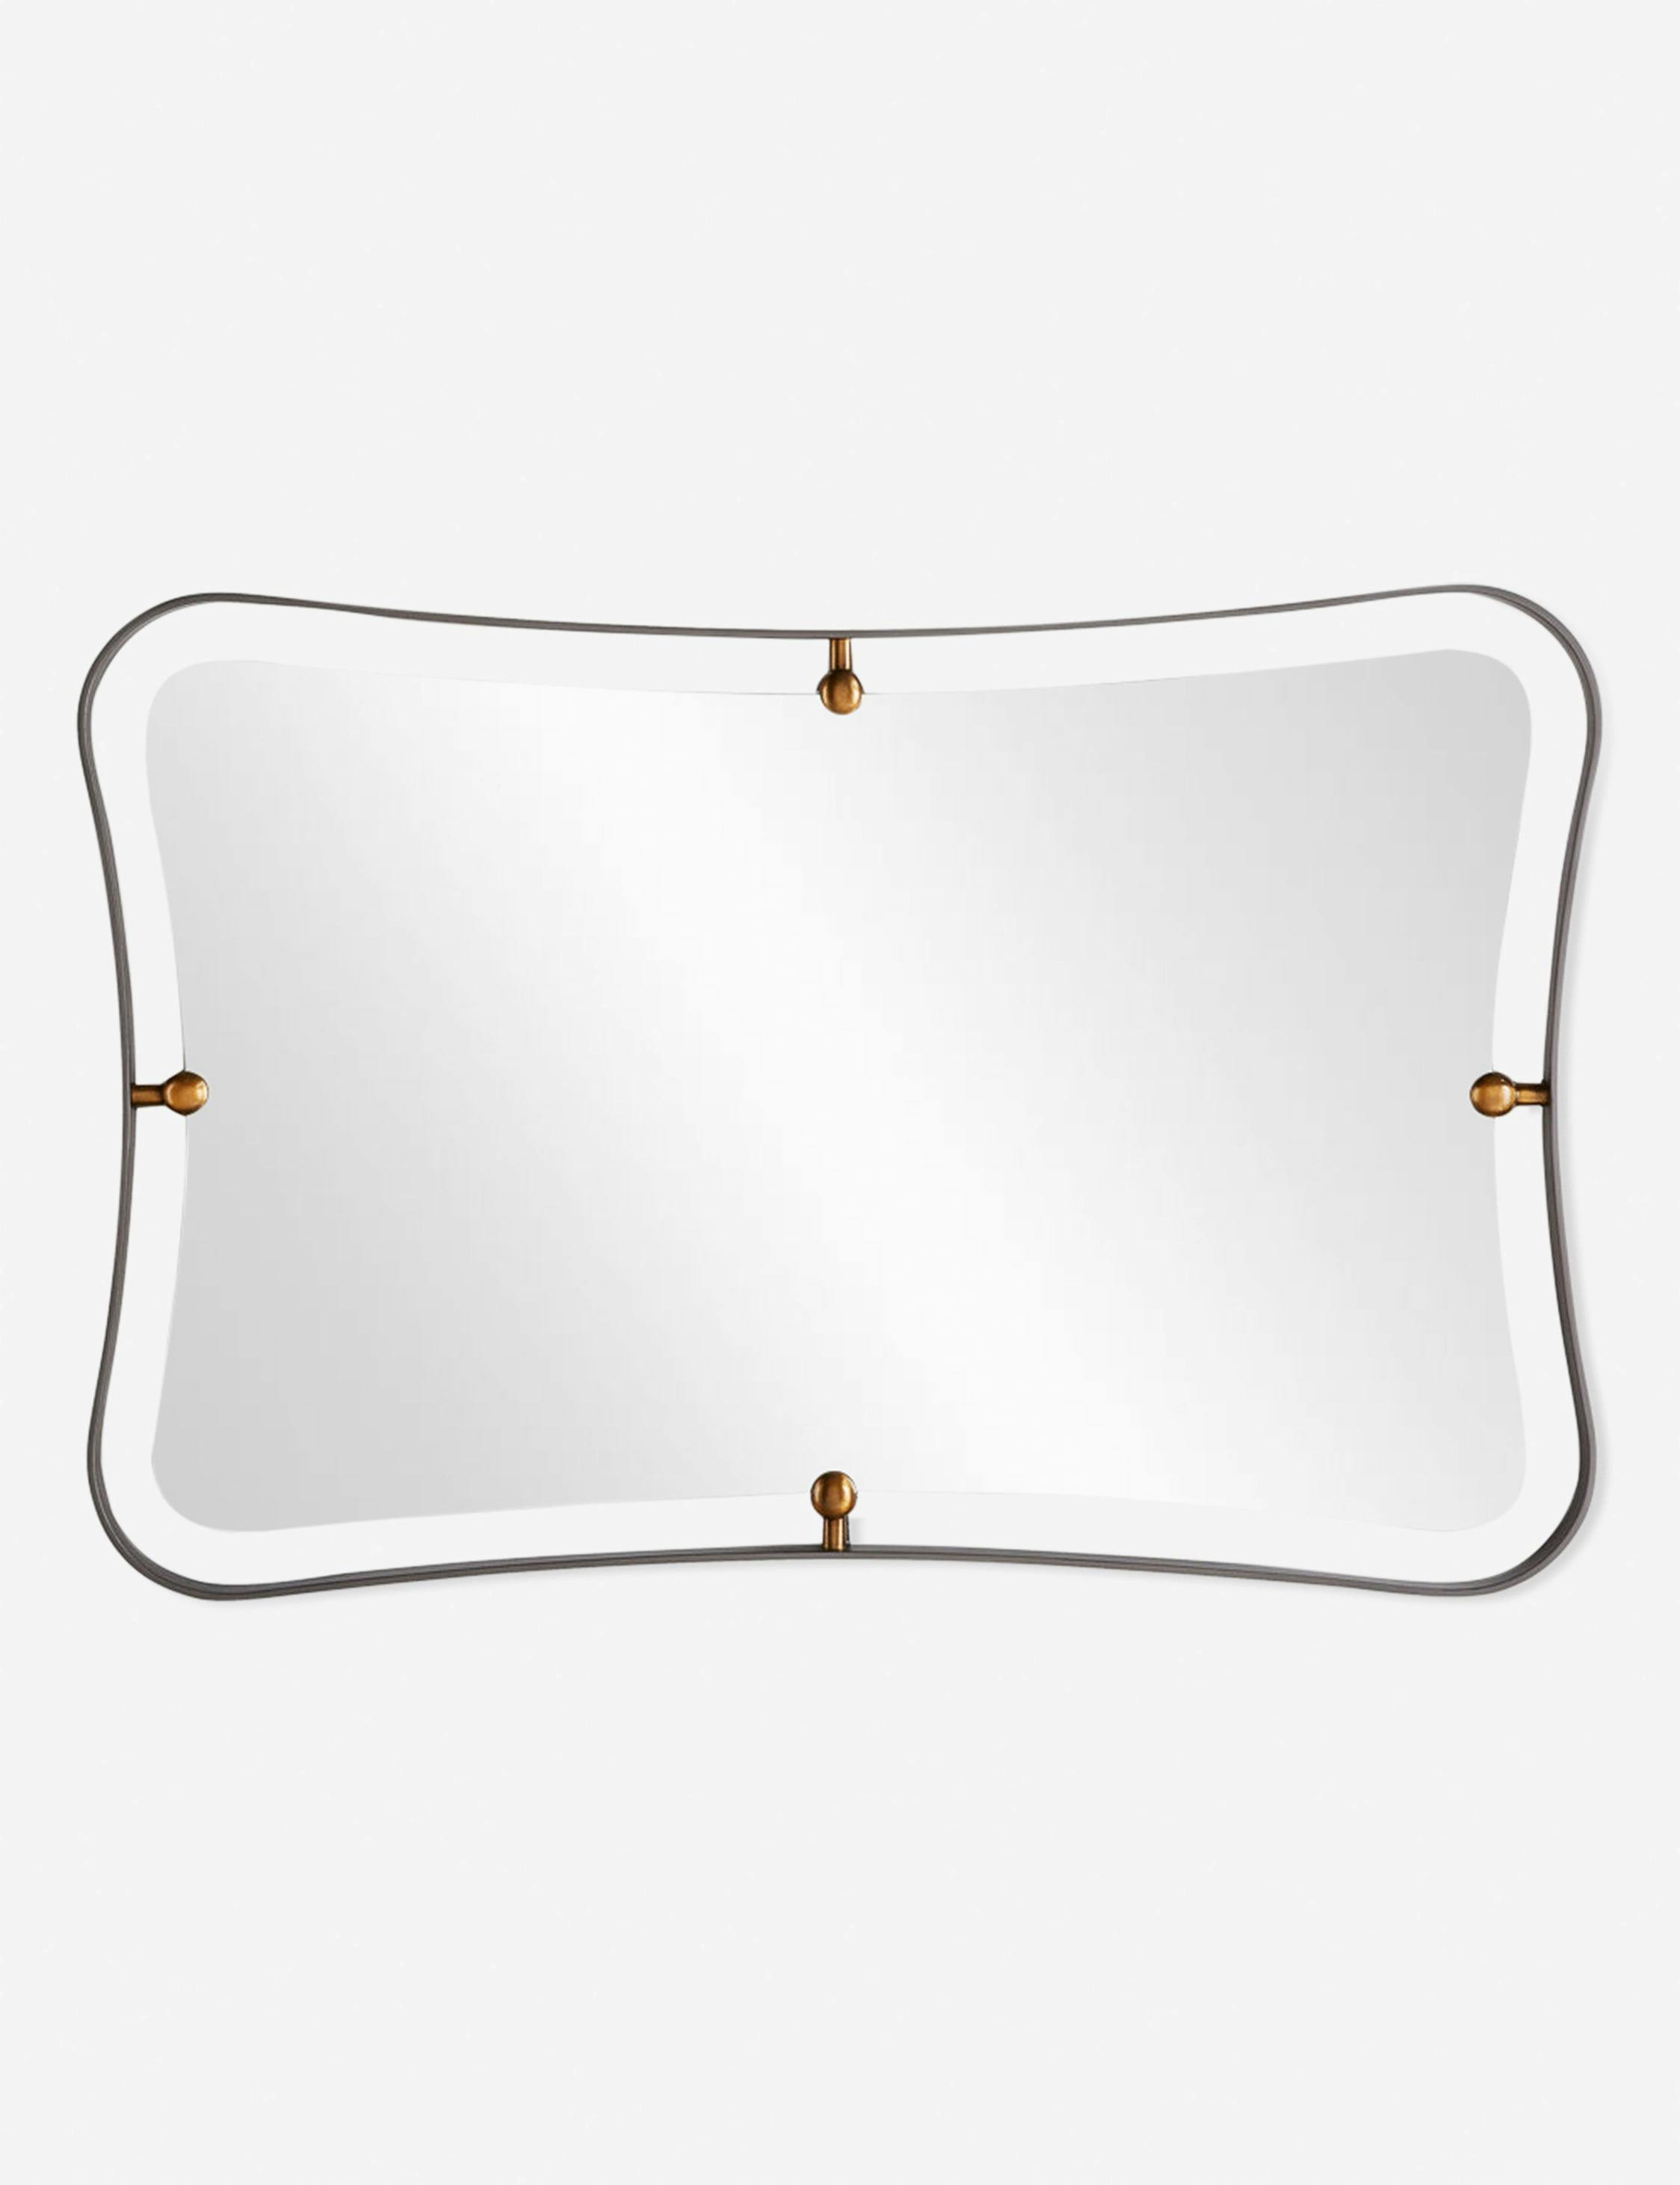 Janey Rectangular Gold and Iron Hourglass Wall Mirror 45"x30"